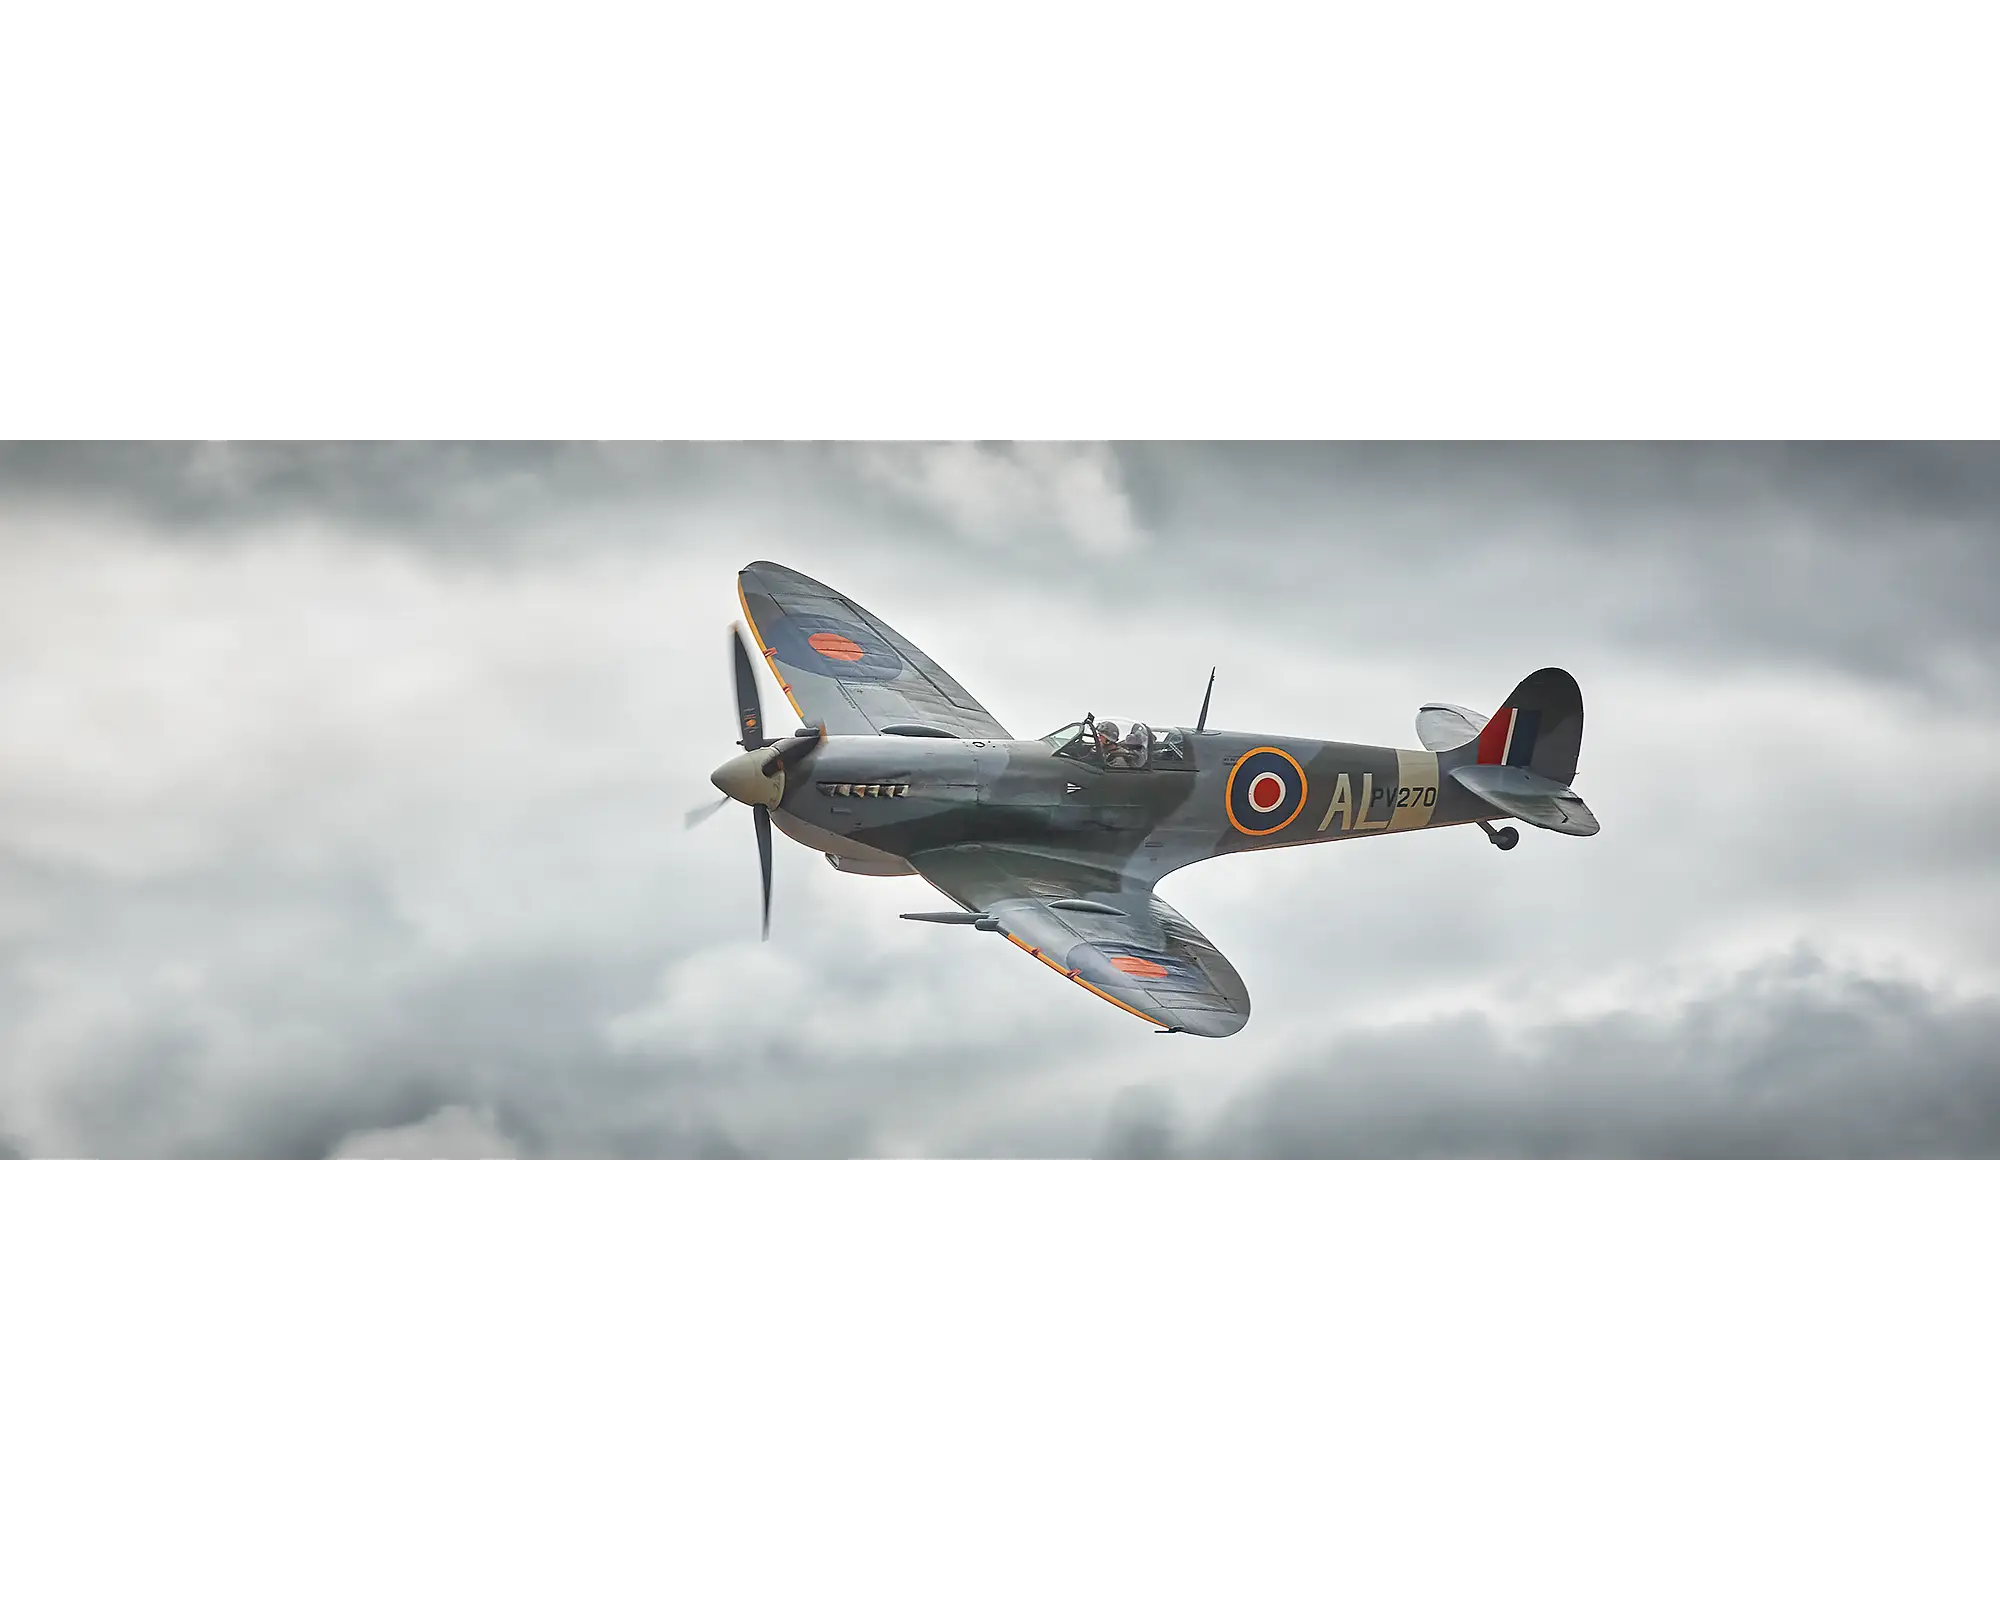 Vickers Supermarine Mk IXc PV270 Spitfire flying through clouds. 